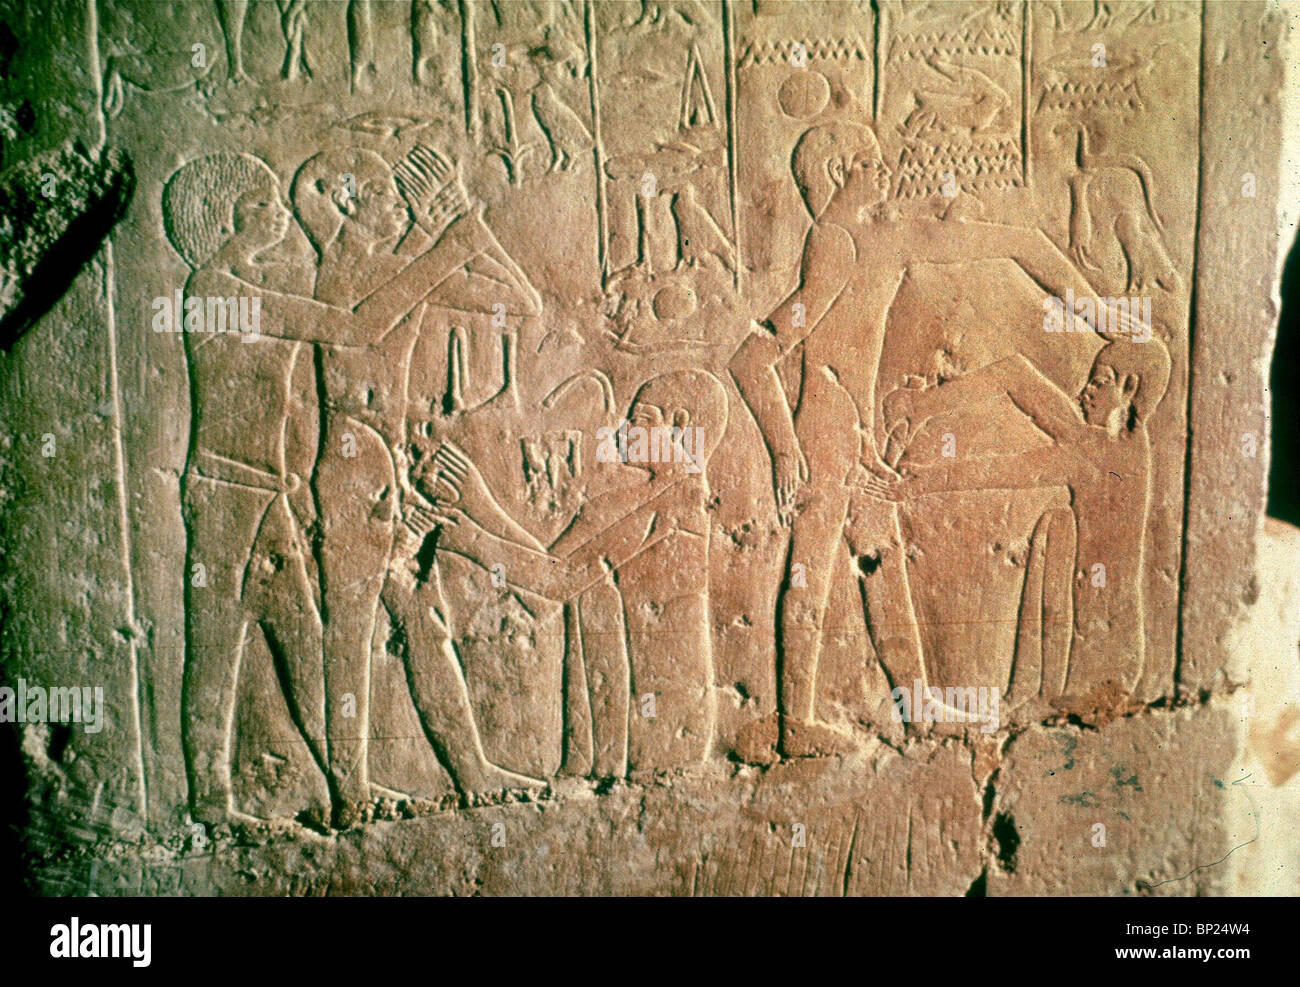 Circumcision Scene Depicted On A Wall Relief In Anach Machor S Tomb Egypt Dating From 22nd C